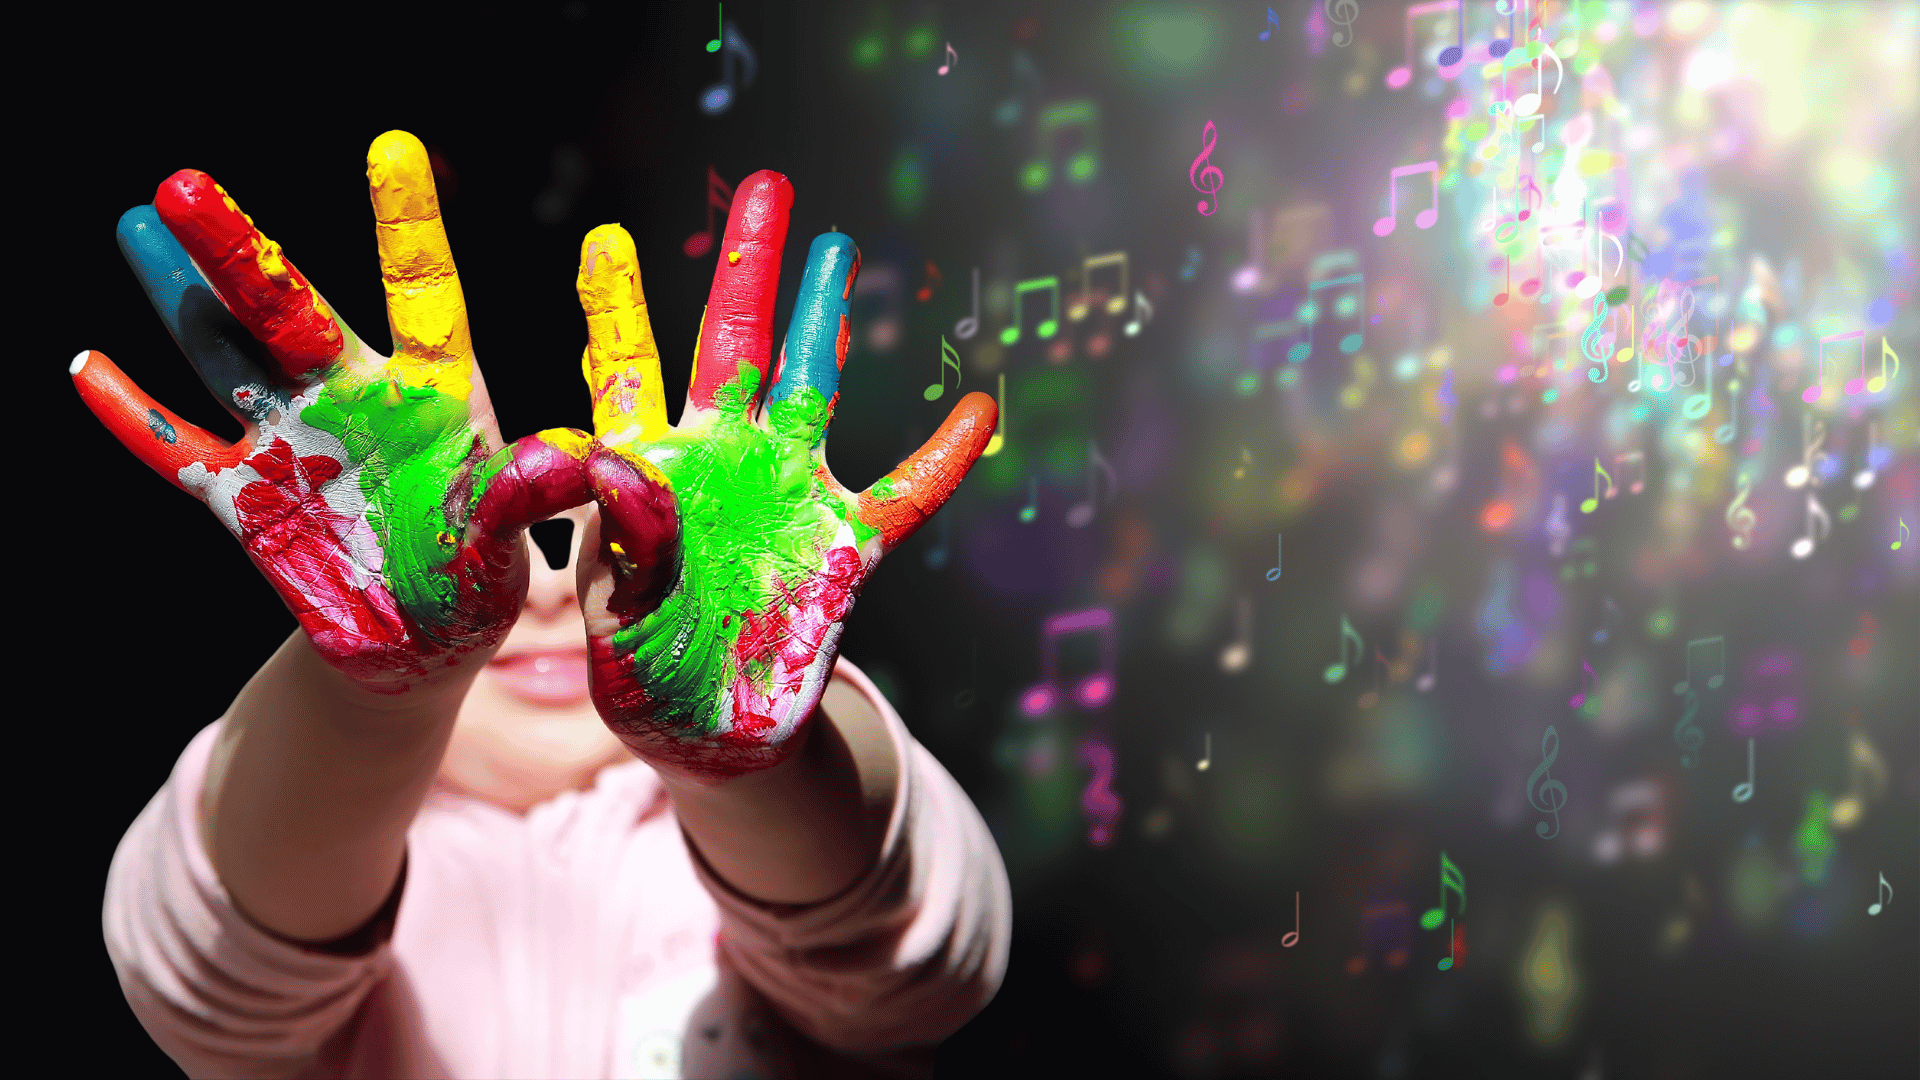 A child holding her colorfully painted hands towards the camera against a background of musical notes that appear to fly into a light